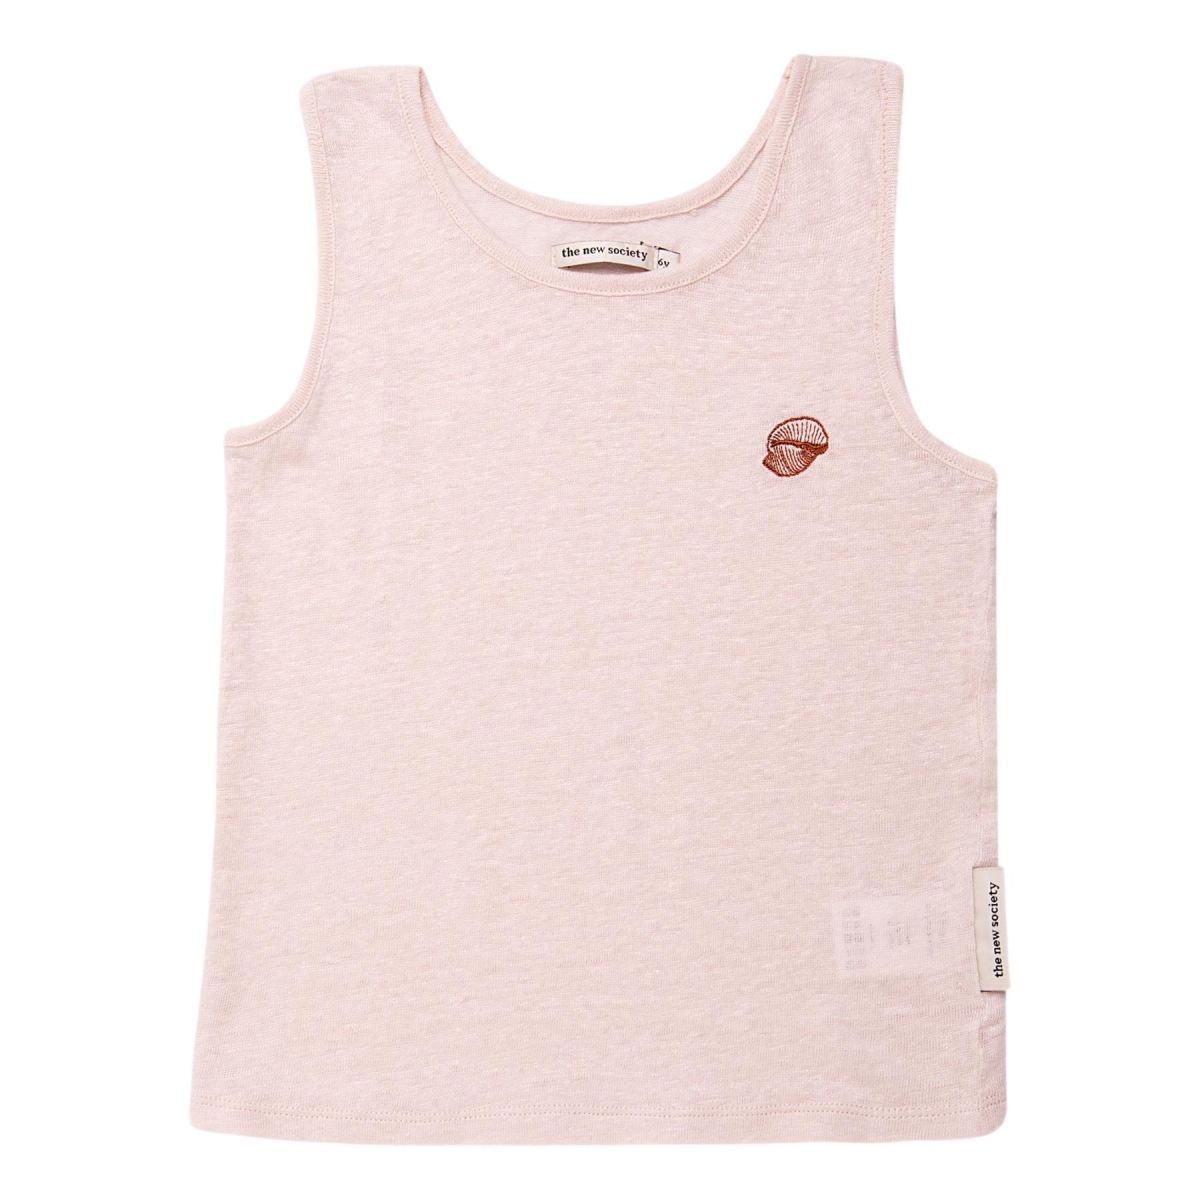 The New Society Ariel Tee embroidered Blush SS21KW700201 